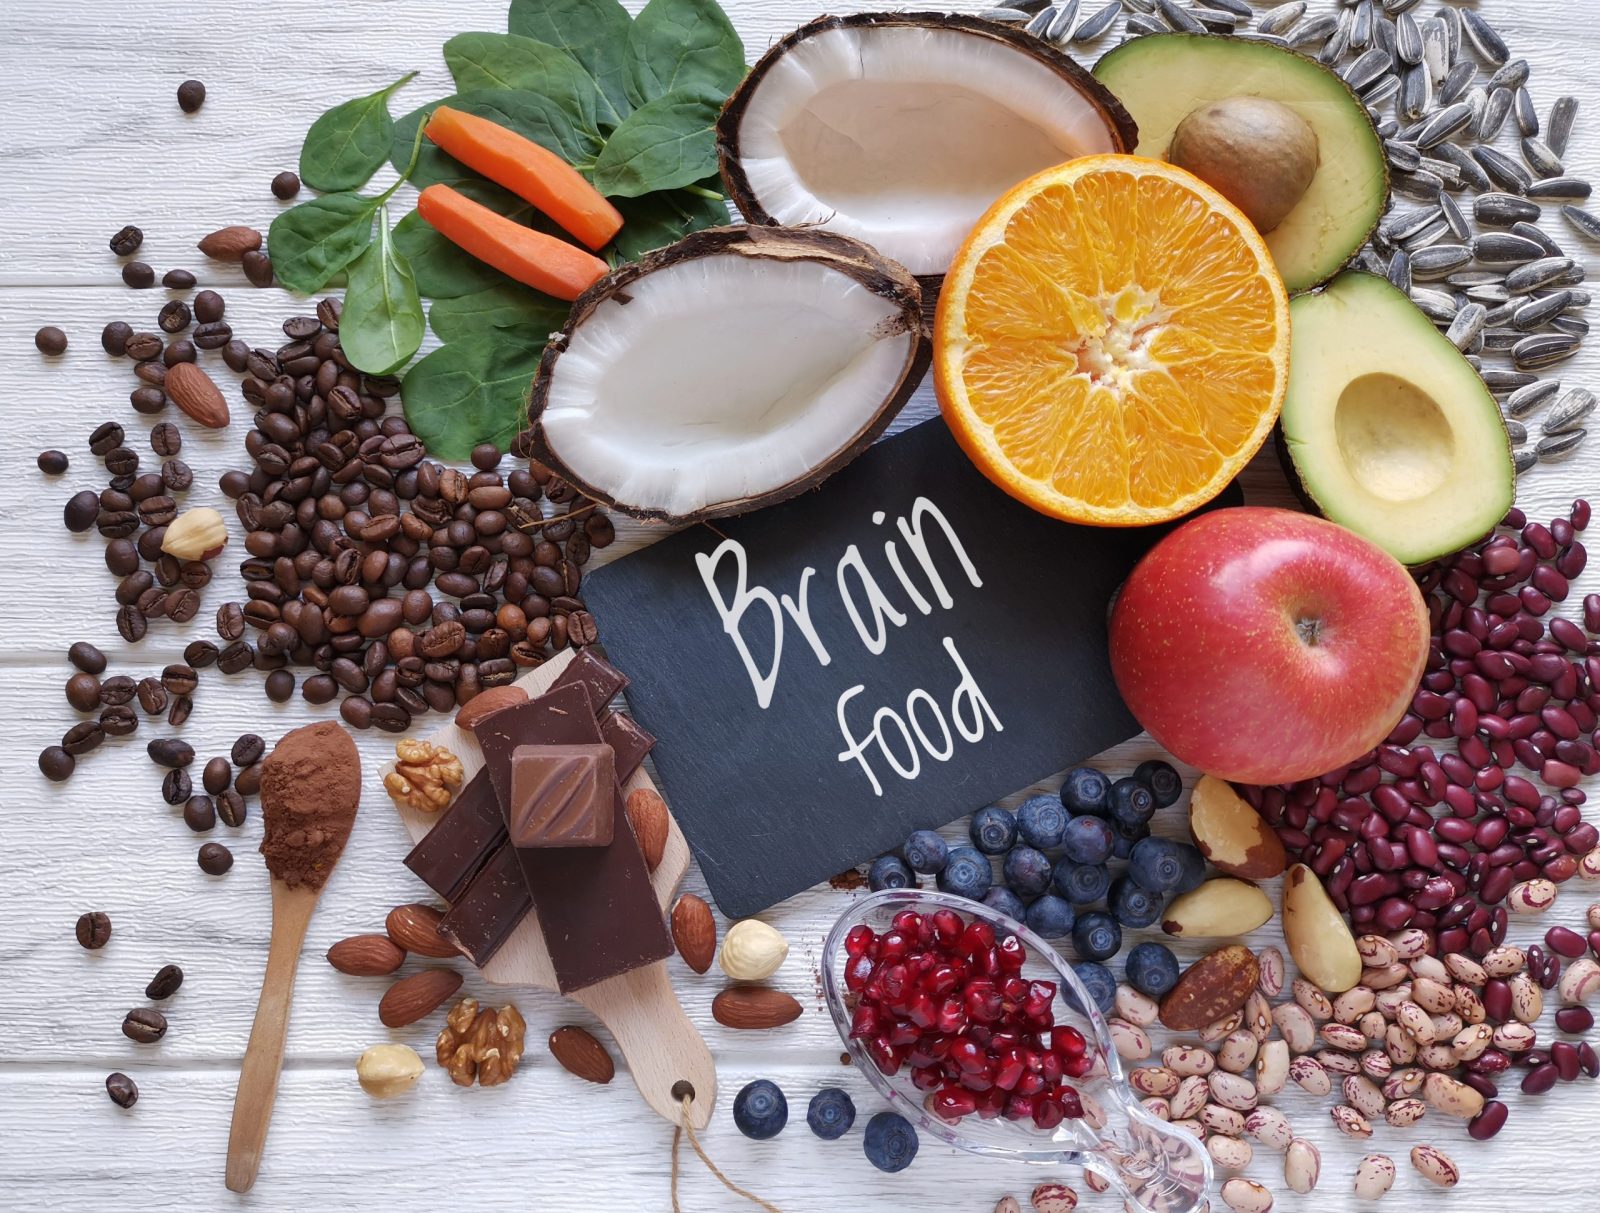 Fruits, nuts, chocolate and beans with a sign reading "Brain food" in the middle